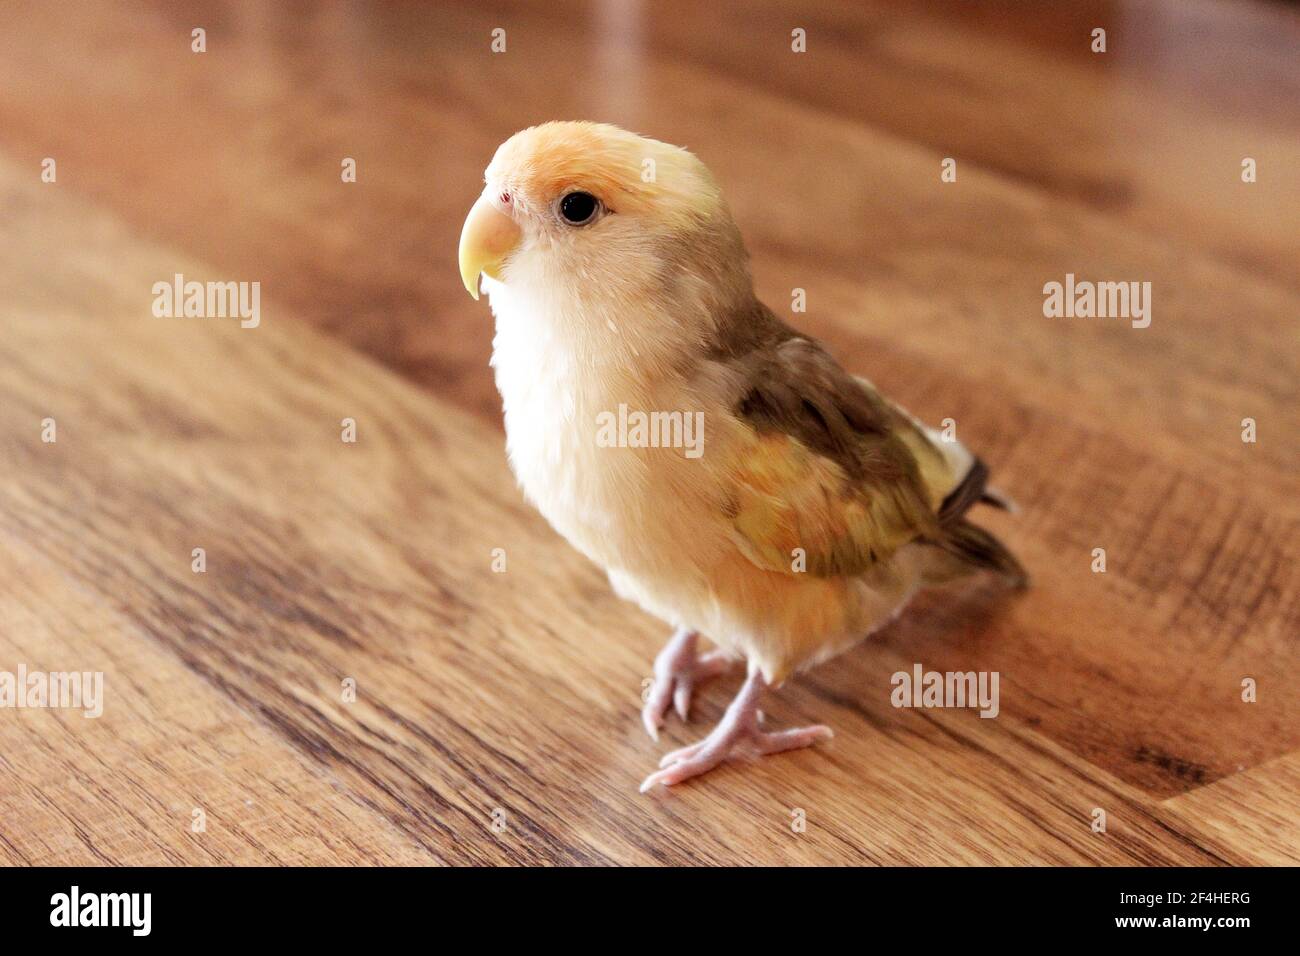 Small yellow parrot standing on a parquet in the house Stock Photo